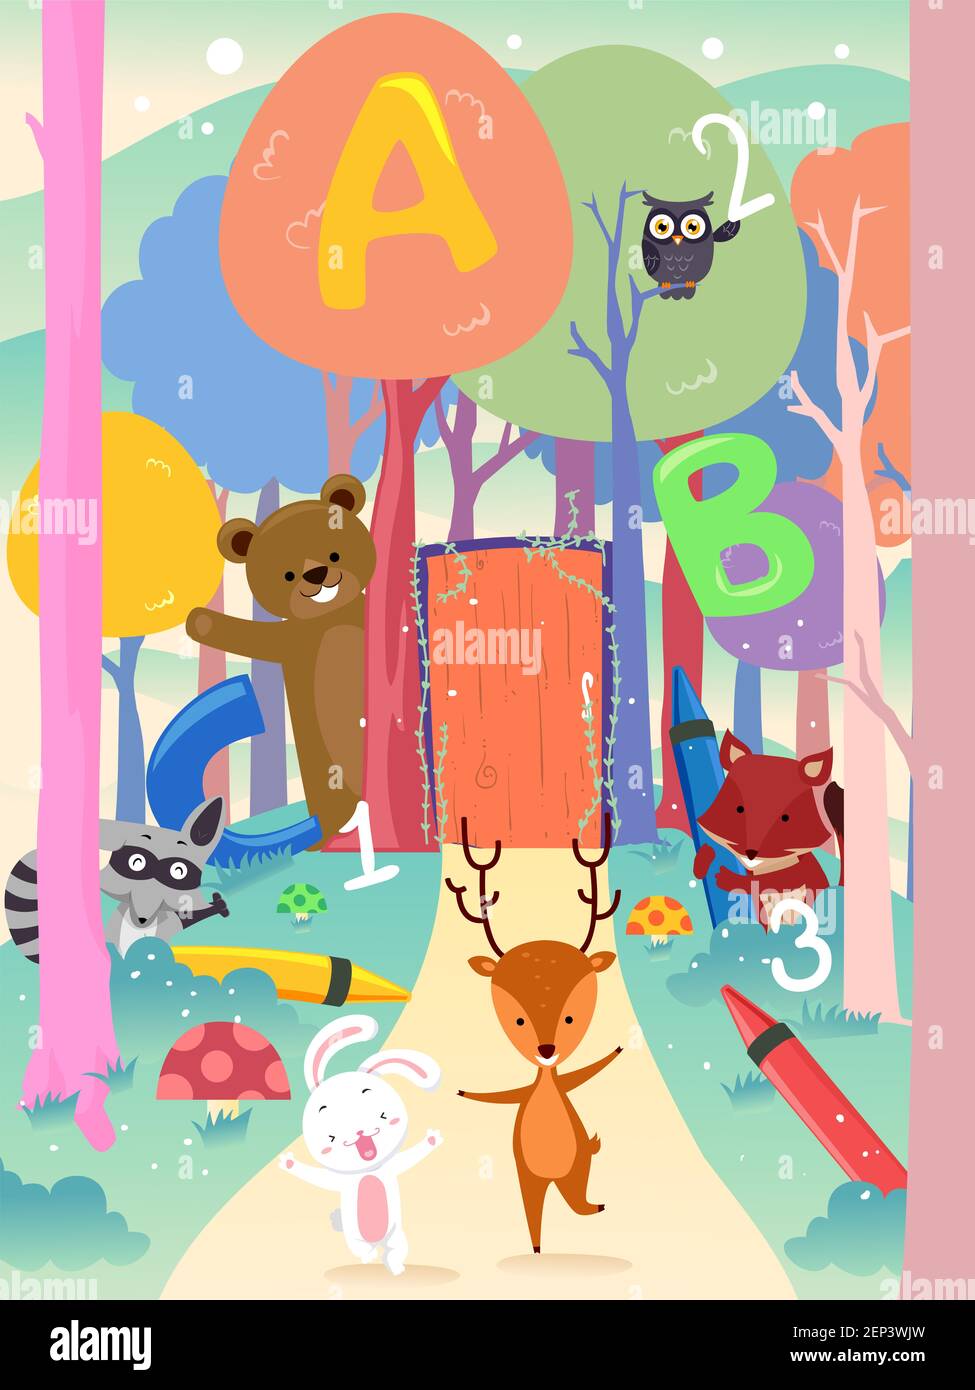 Illustration of Forest Animals Welcoming by the Door with ABC and 123 Stock Photo